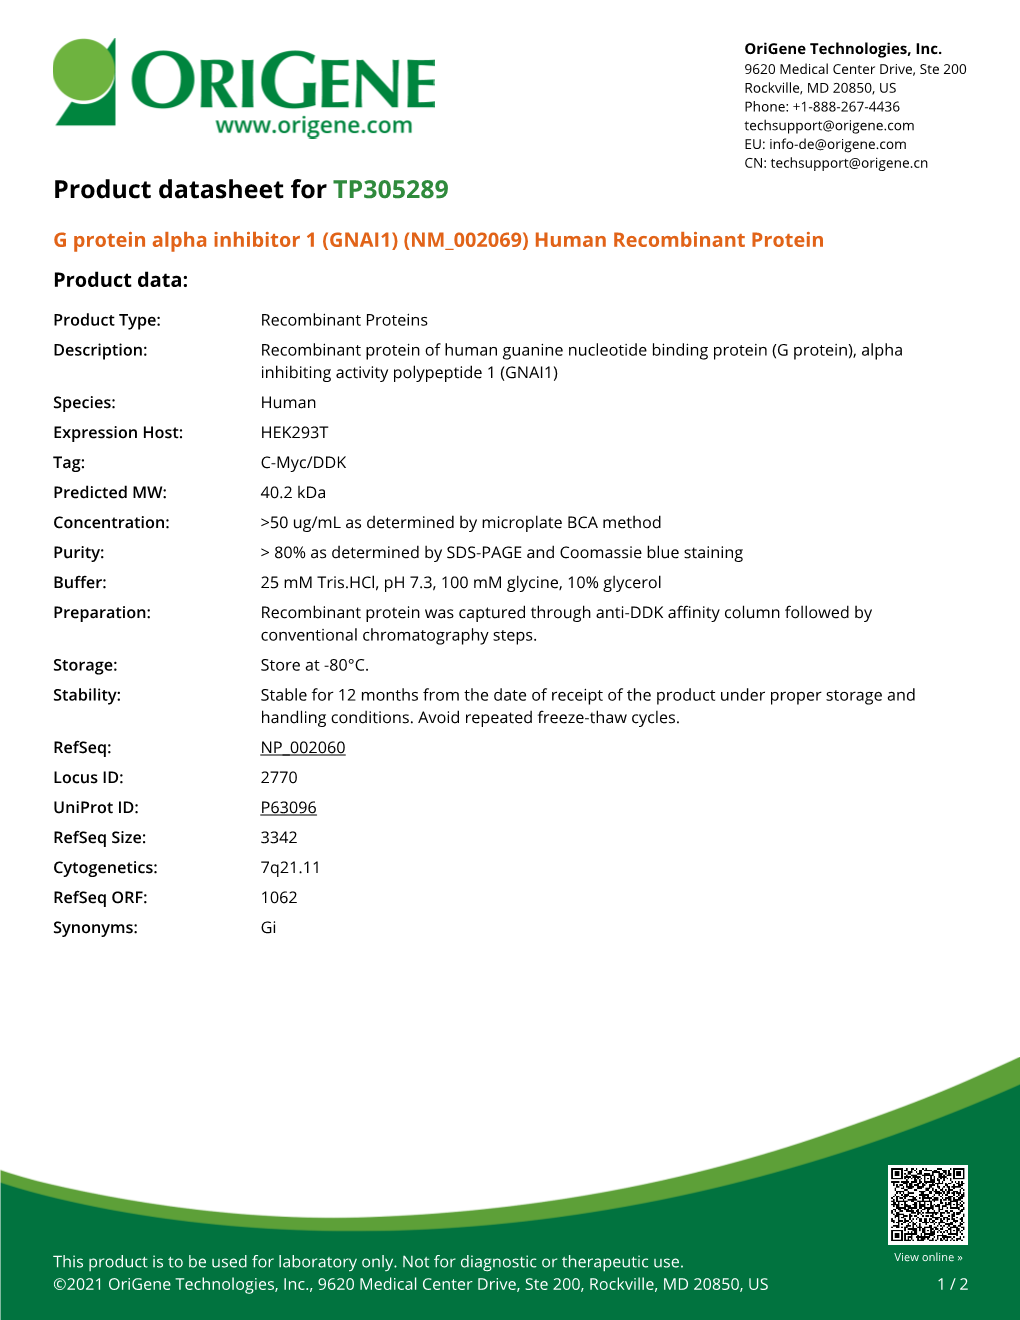 G Protein Alpha Inhibitor 1 (GNAI1) (NM 002069) Human Recombinant Protein Product Data